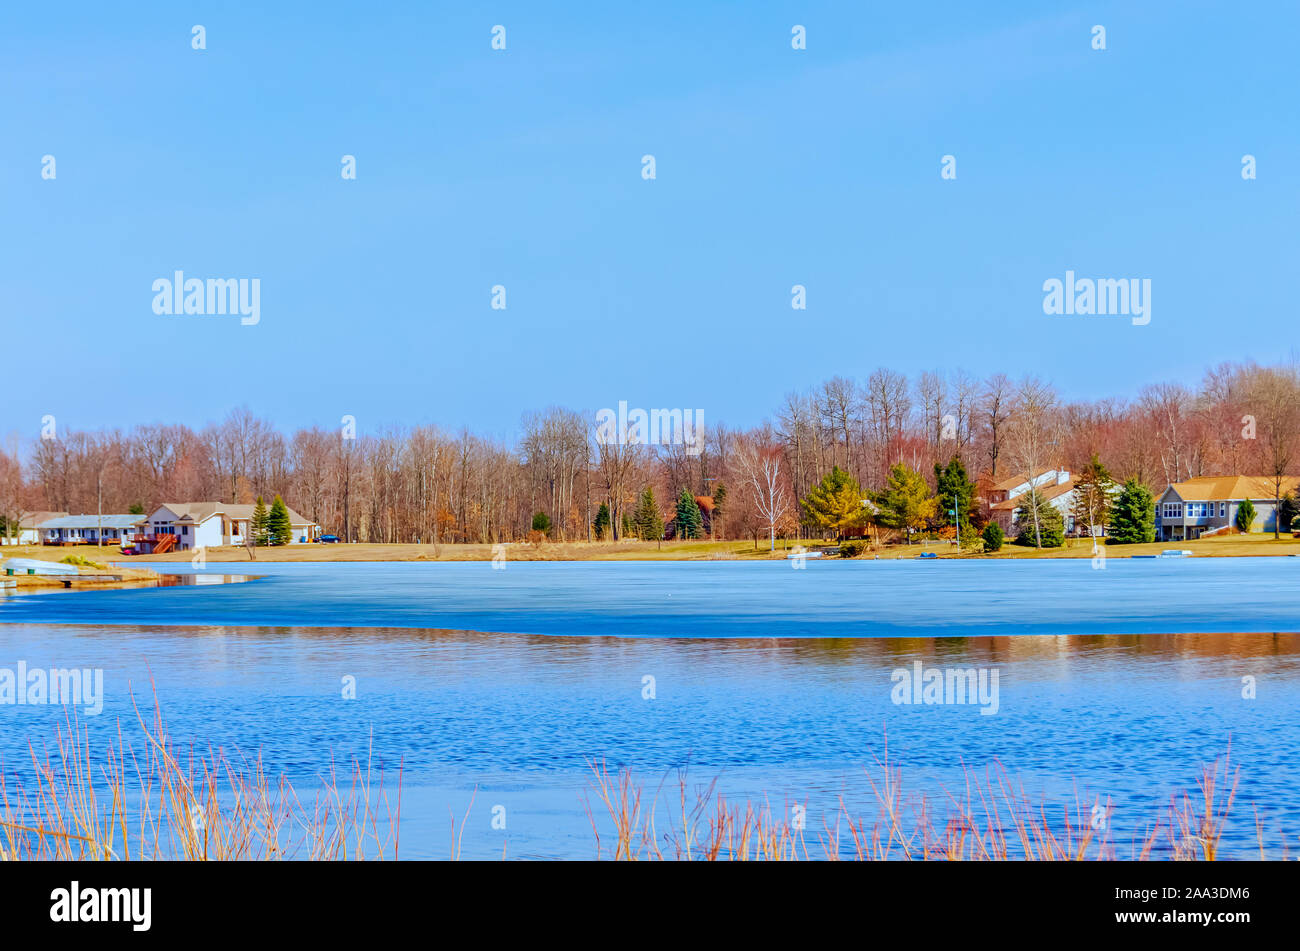 Houses on the banks of a thawing lake in upper Michigan, USA. Stock Photo